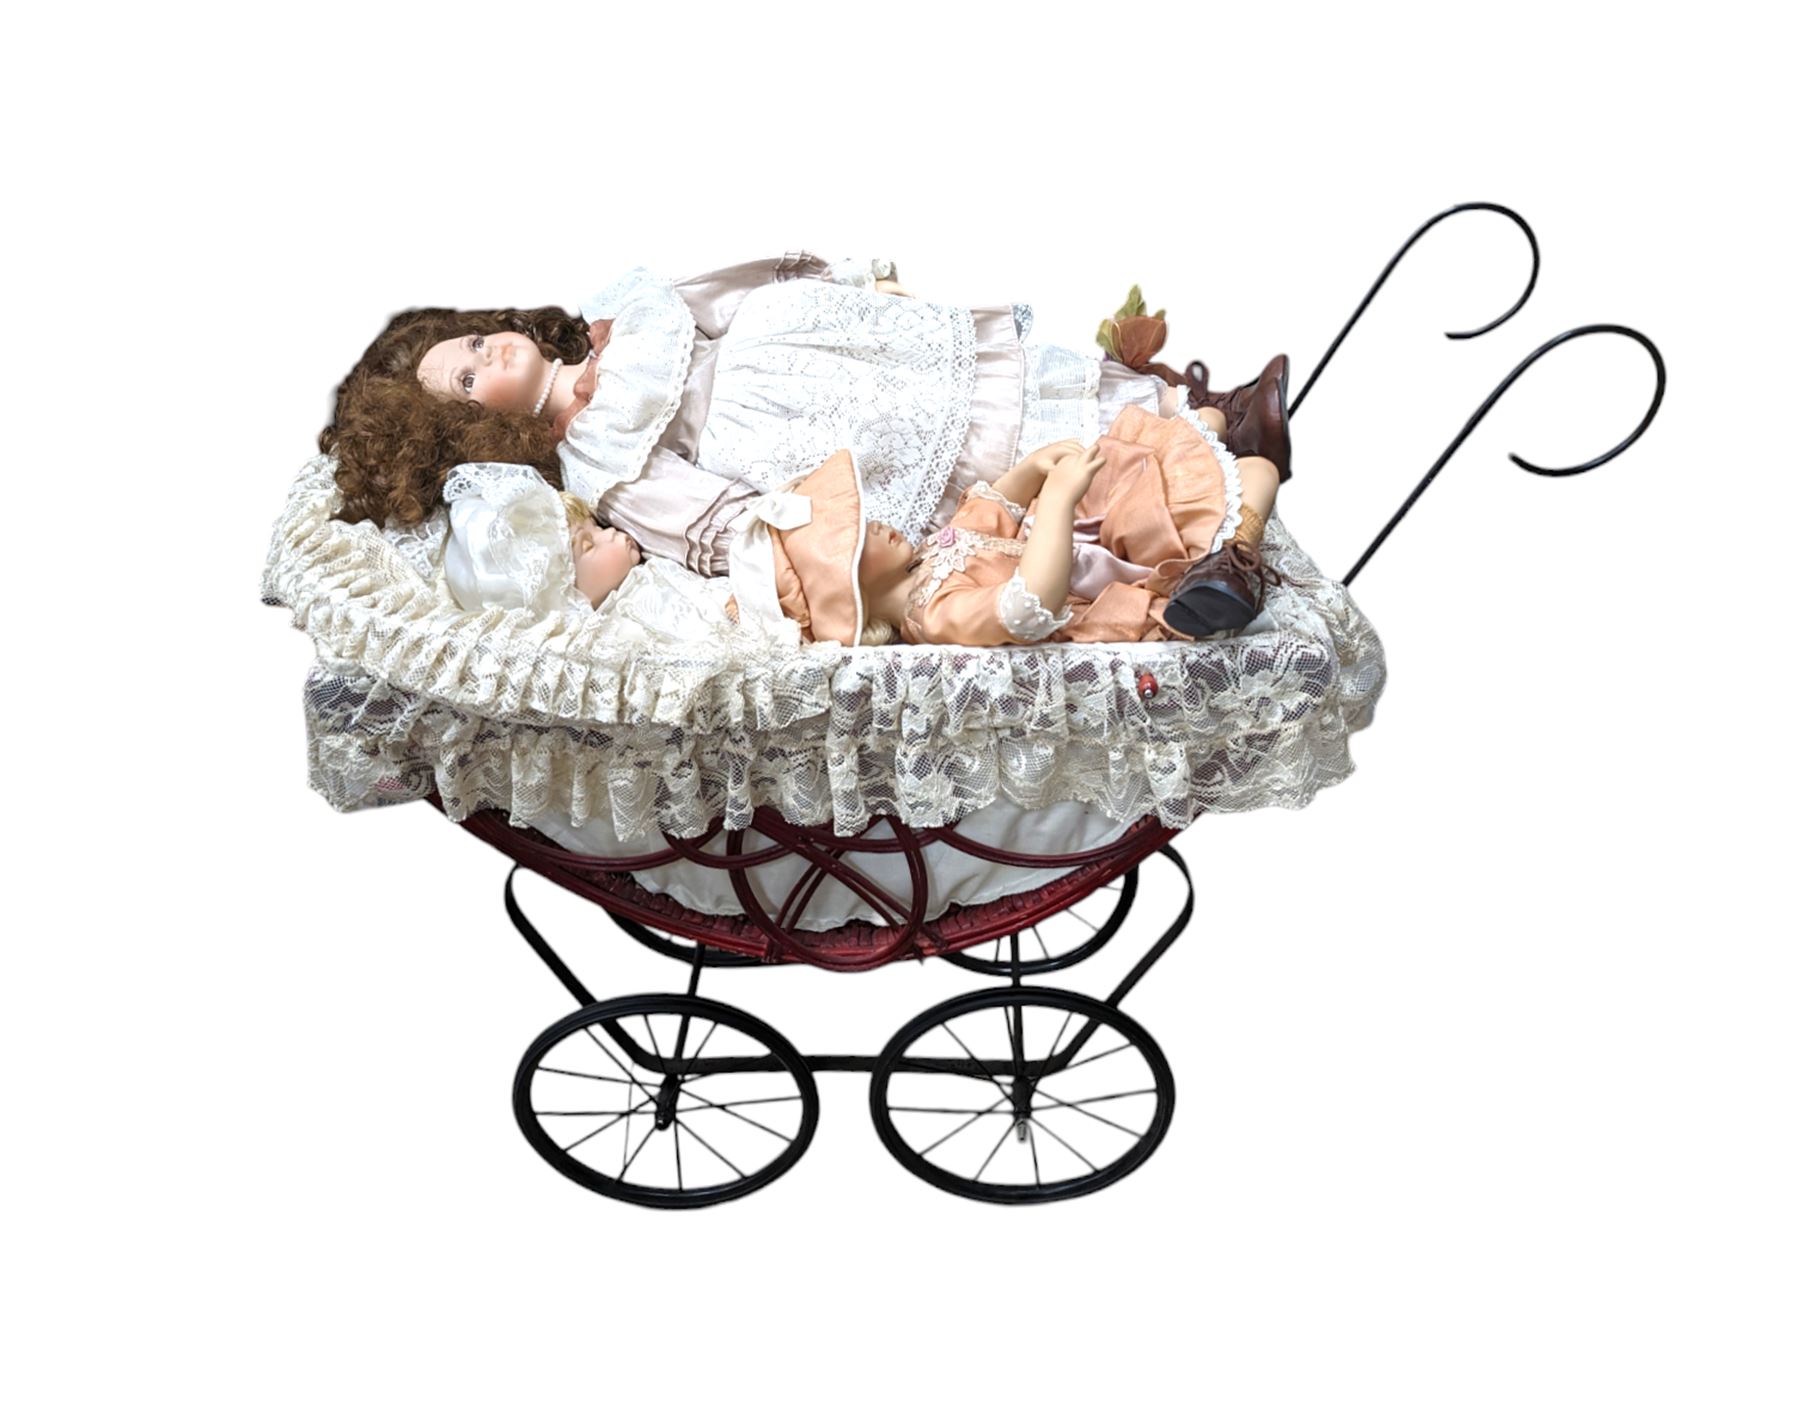 Three porcelain dolls and a wicker dolls pram with lace cover